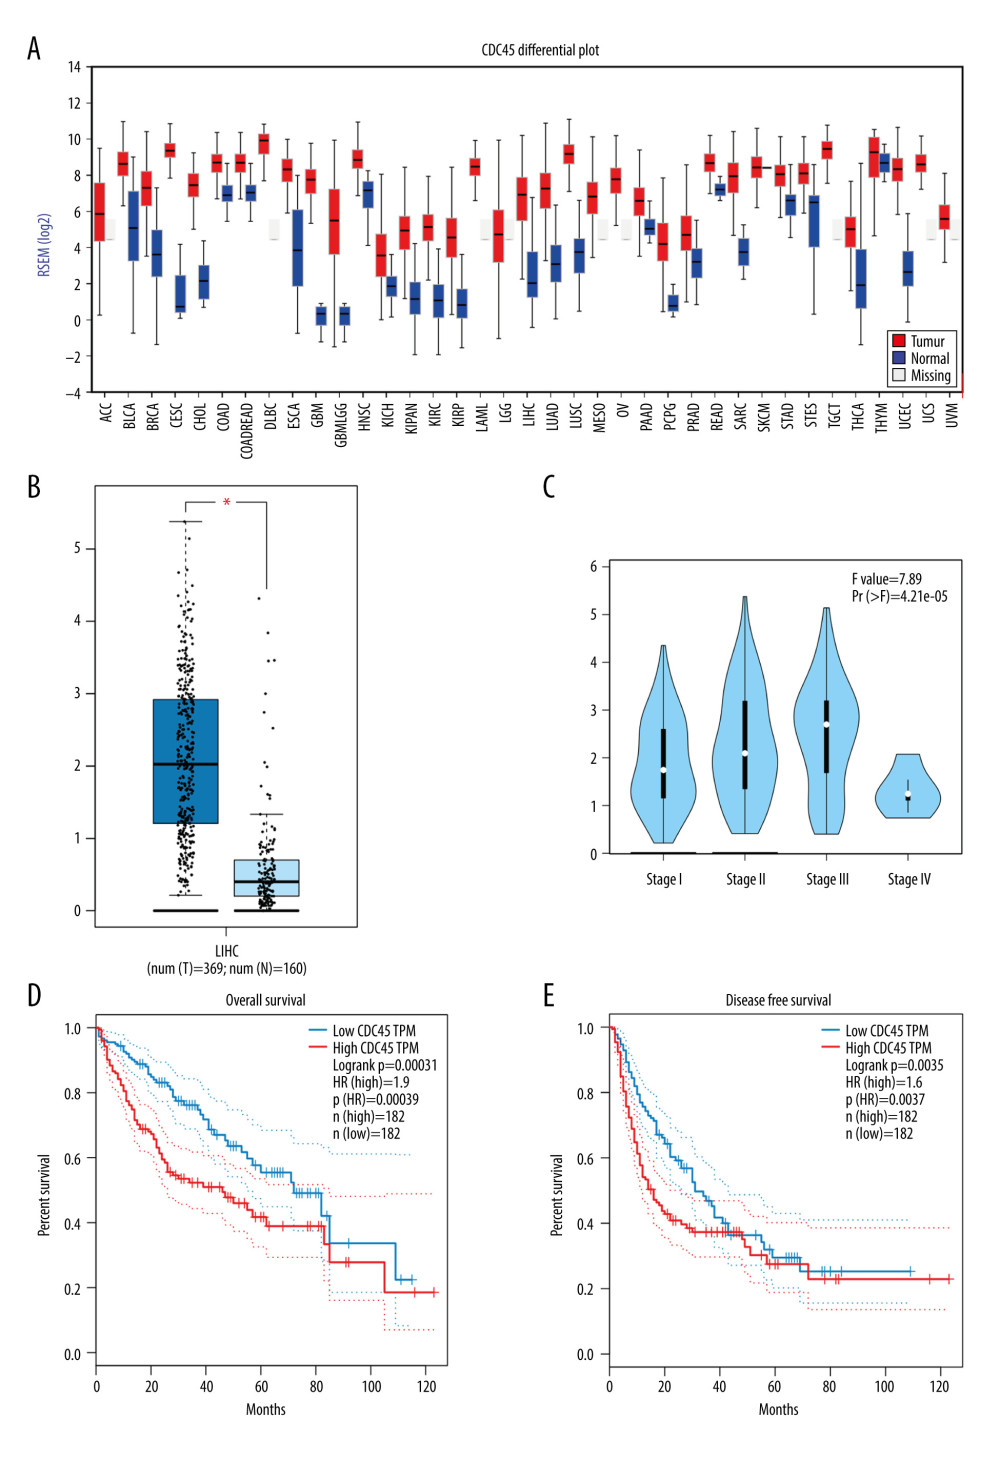 The clinical significance of CDC45 mRNA expression levels in hepatocellular carcinoma (HCC) tissues based on RNA-Seq data. The mRNA expression level of CDC45 was clearly upregulated compared with the controls (A, B). (A) The CDC45 mRNA expression was clearly higher in HCC than in normal tissues. (B) The CDC45 mRNA expression was significantly increased in HCC compared with normal tissues. (C) The CDC45 mRNA expression levels progressively increased from stage I to stage III and decreased in stage IV. A high CDC45 mRNA expression level indicated a negative prognosis (D: for overall survival, HR=1.9, P=0.00039; E: for disease-free survival, HR=1.6, P=0.0037). HR=hazard ratio.